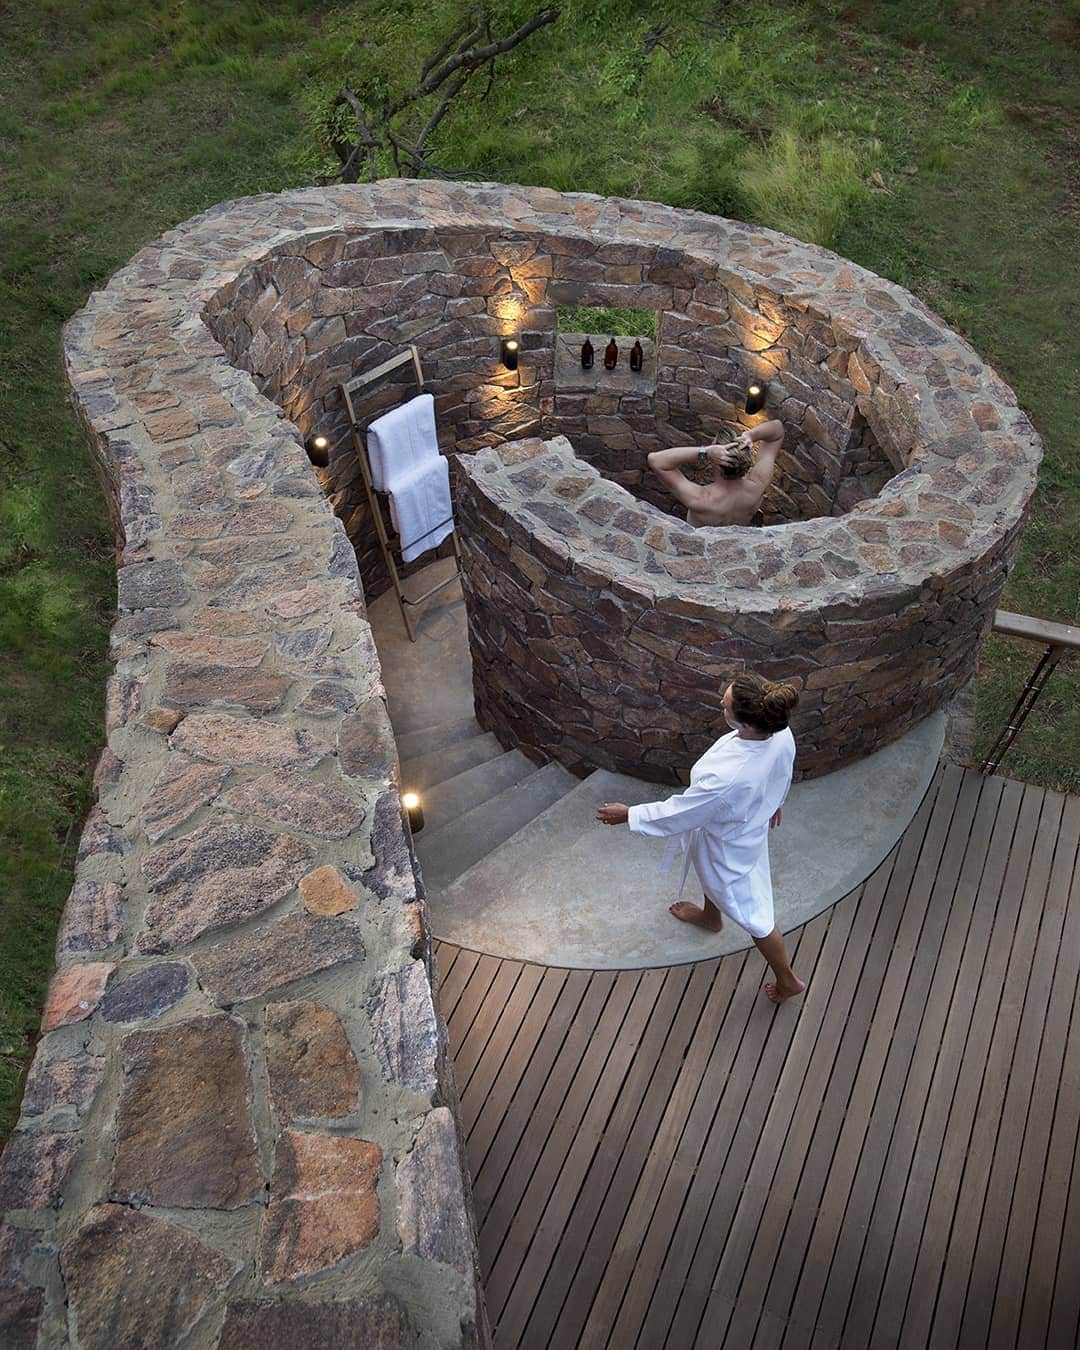 A woman in a white robe walks towards an elevated stone-built circular spa bath surrounded by greenery, where another woman relaxes; an exhaustive roundup of outdoor shower ideas enhances the serene ambiance.